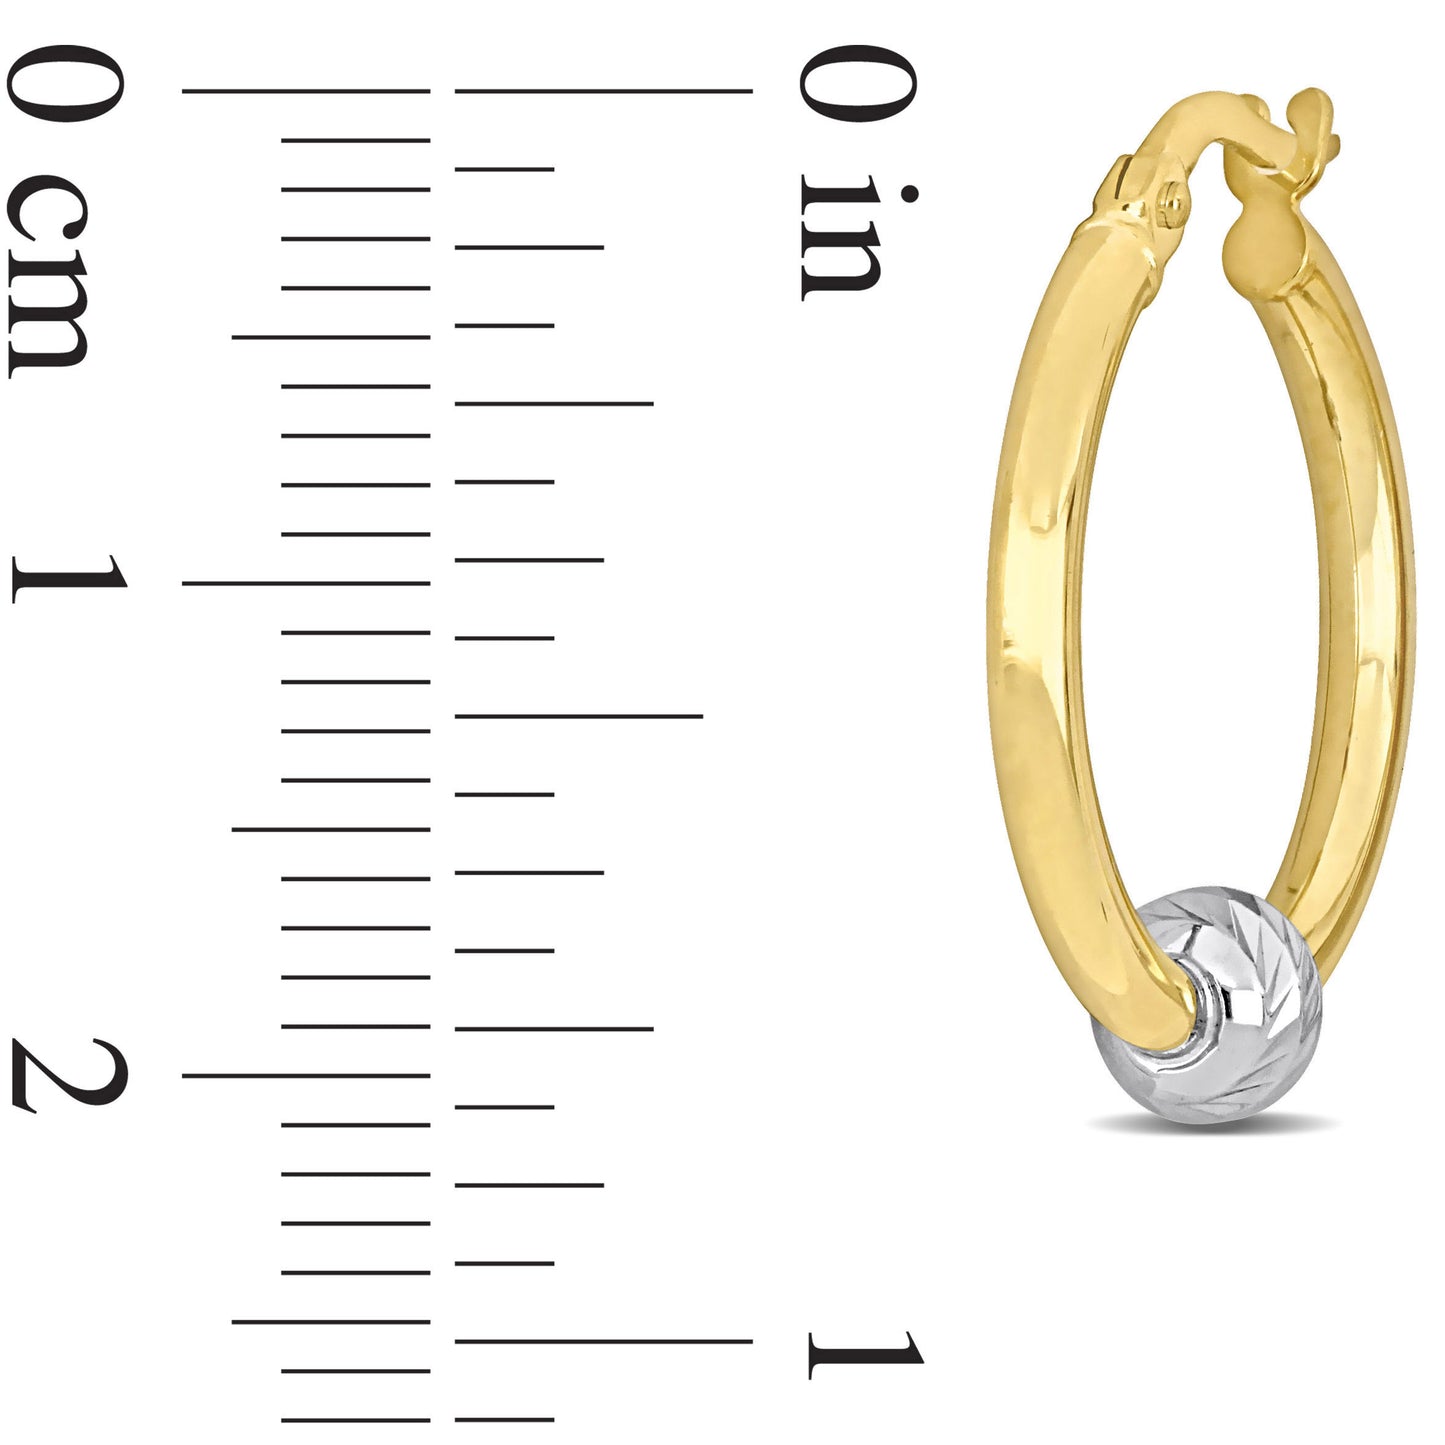 White Dot Hoops in 14k Yellow Gold